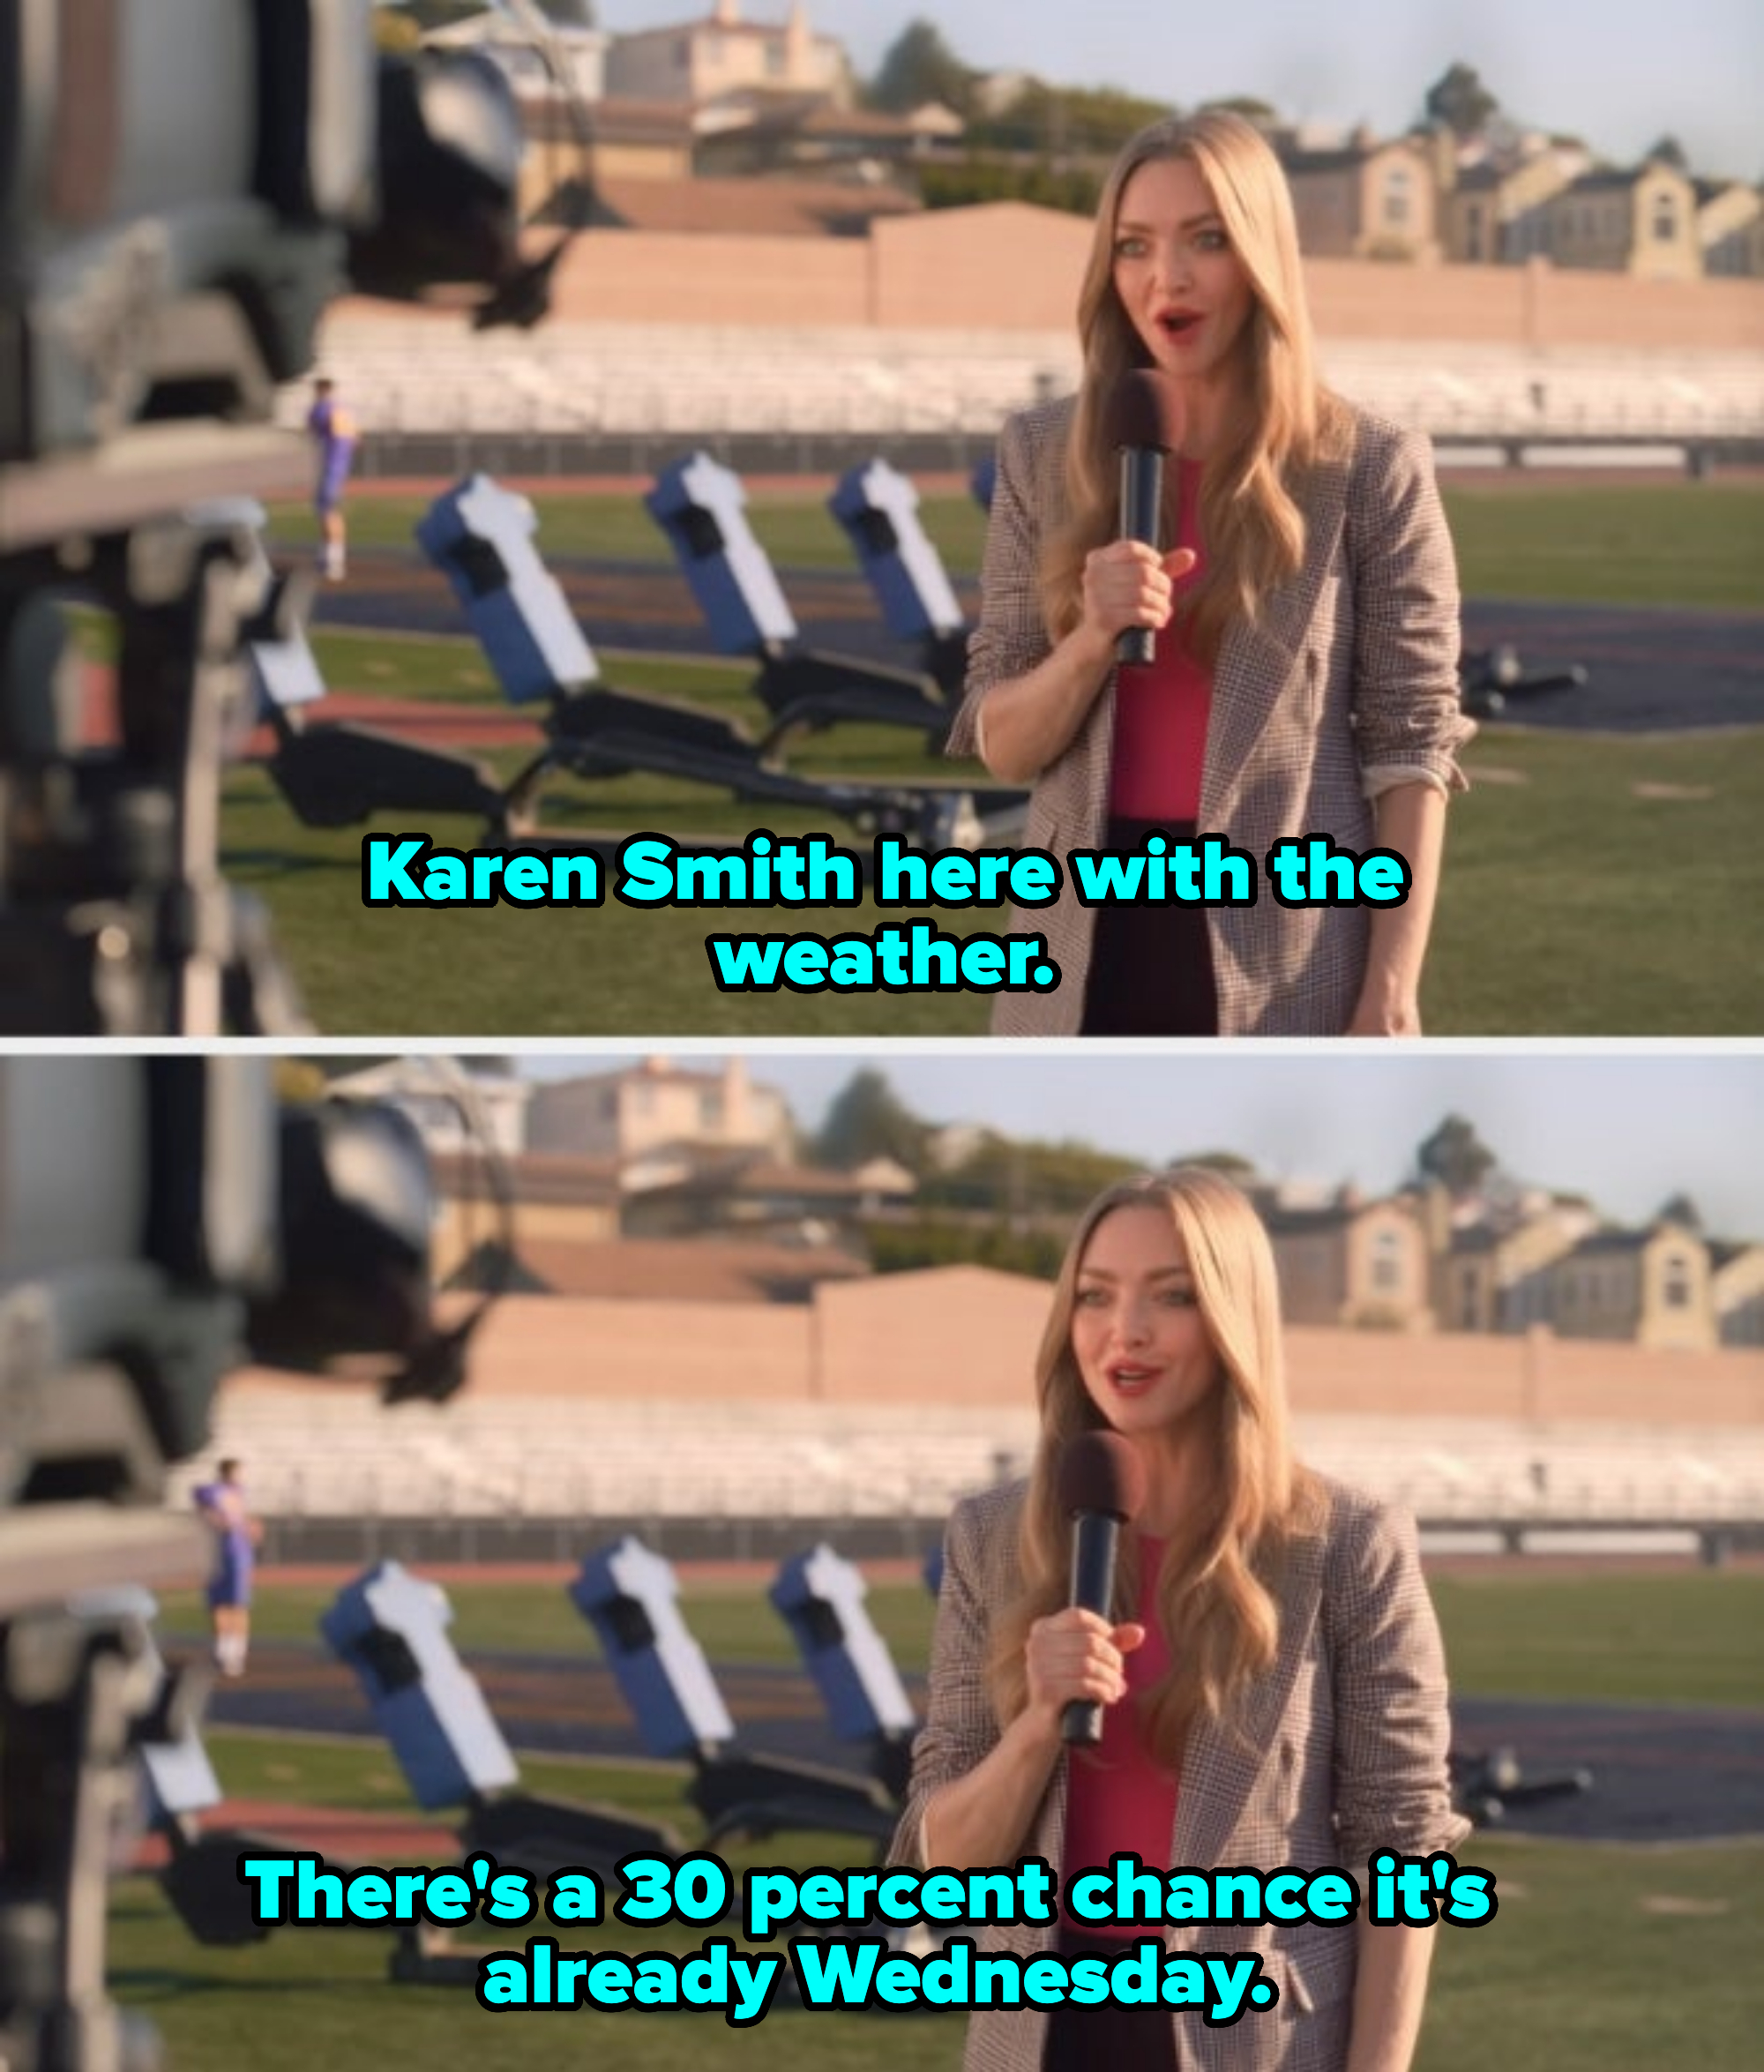 karen smith here, there&#x27;s a 30 percent change it&#x27;s already wednesday